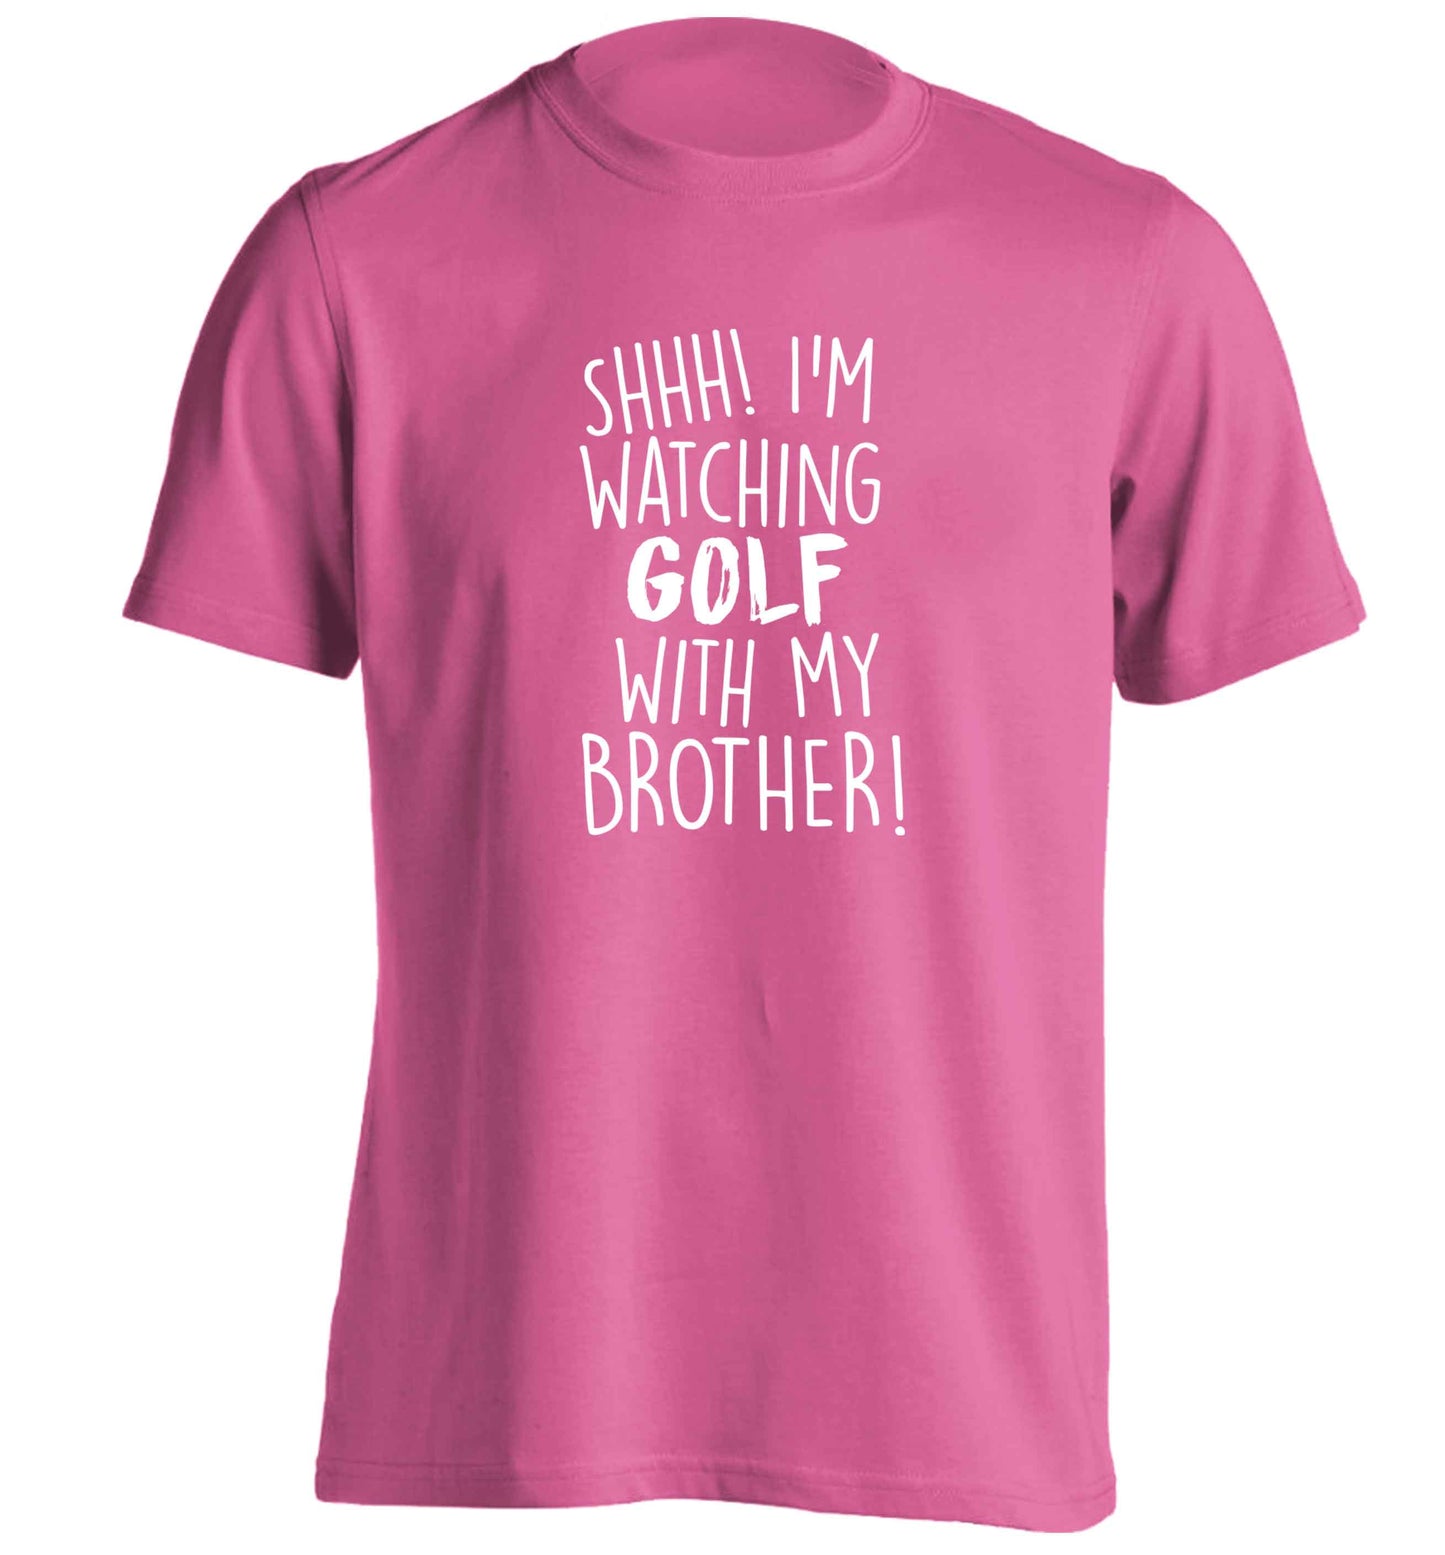 Shh I'm watching golf with my brother adults unisex pink Tshirt 2XL